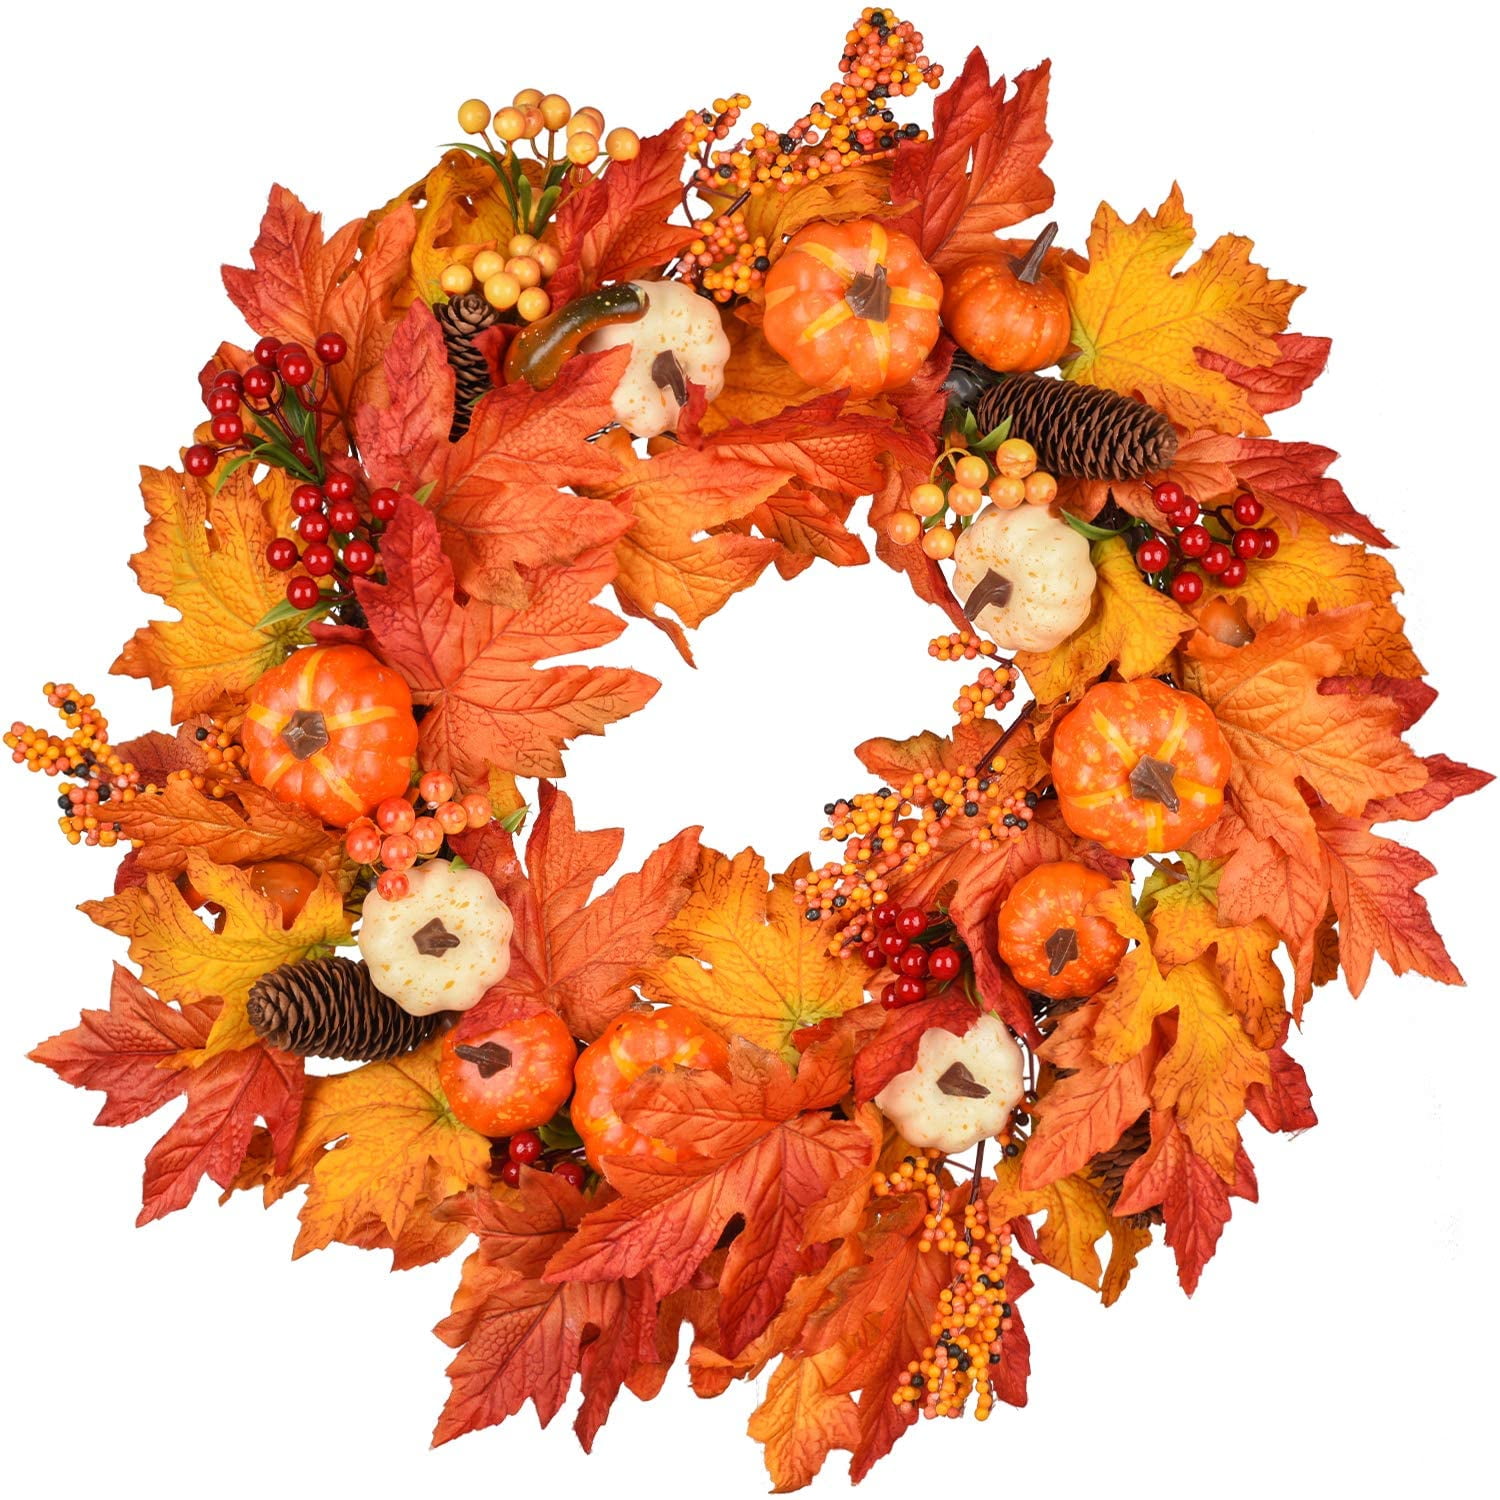 Fall Wreath Fall Decor Monogram Wreath with Pinecones Fall Berries and Leaves Wreath Fall Colors 22 inch shown Autumn Fall Decor